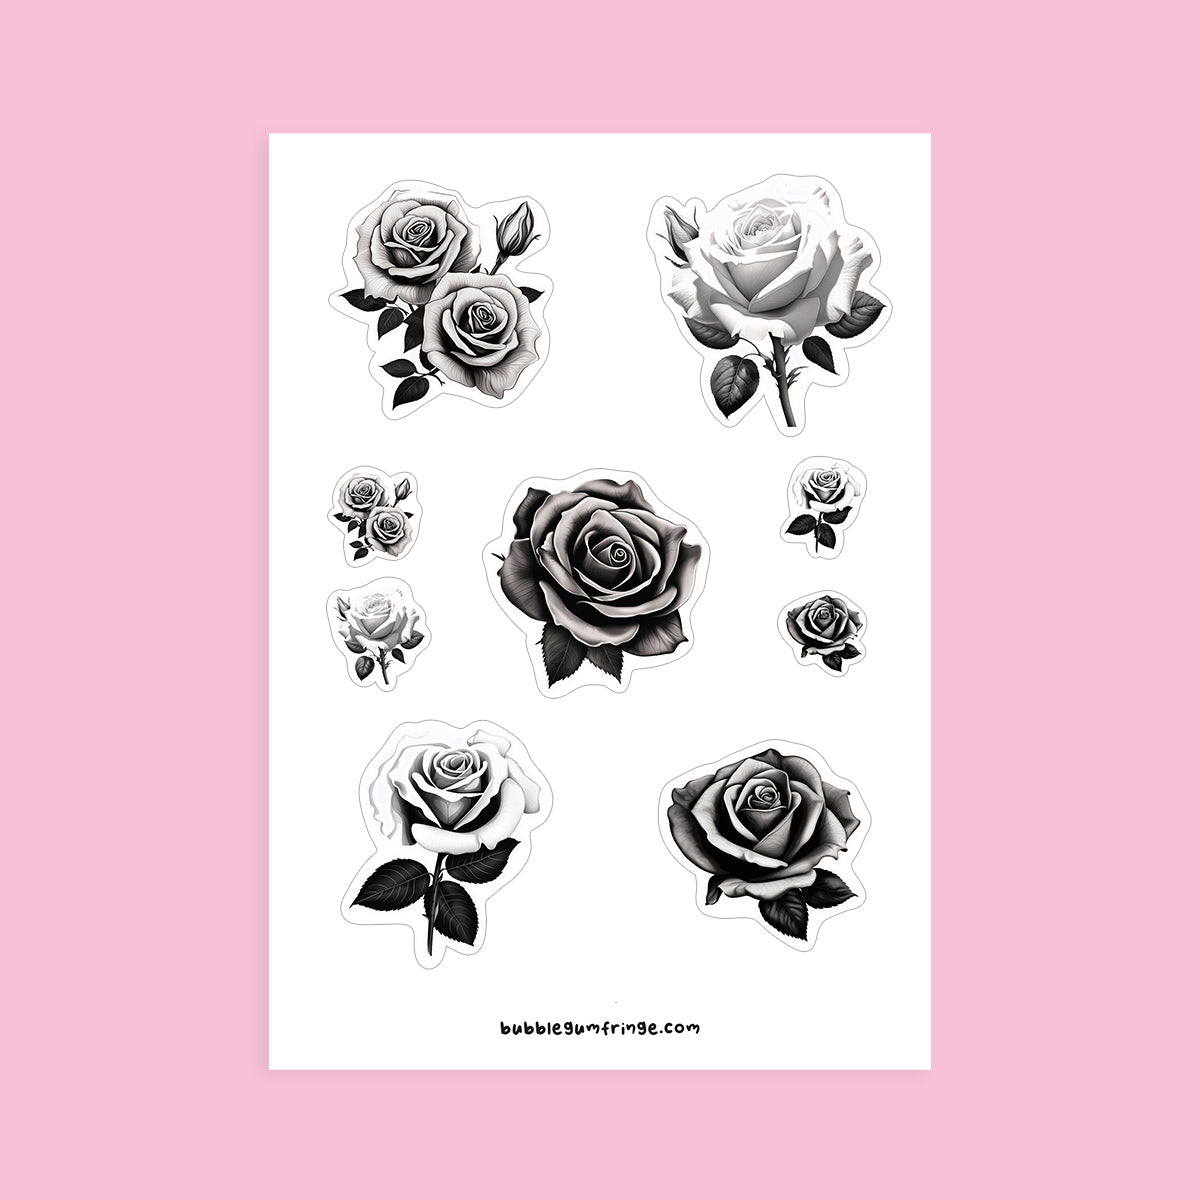 Sticker sheet with black and white roses-style 3